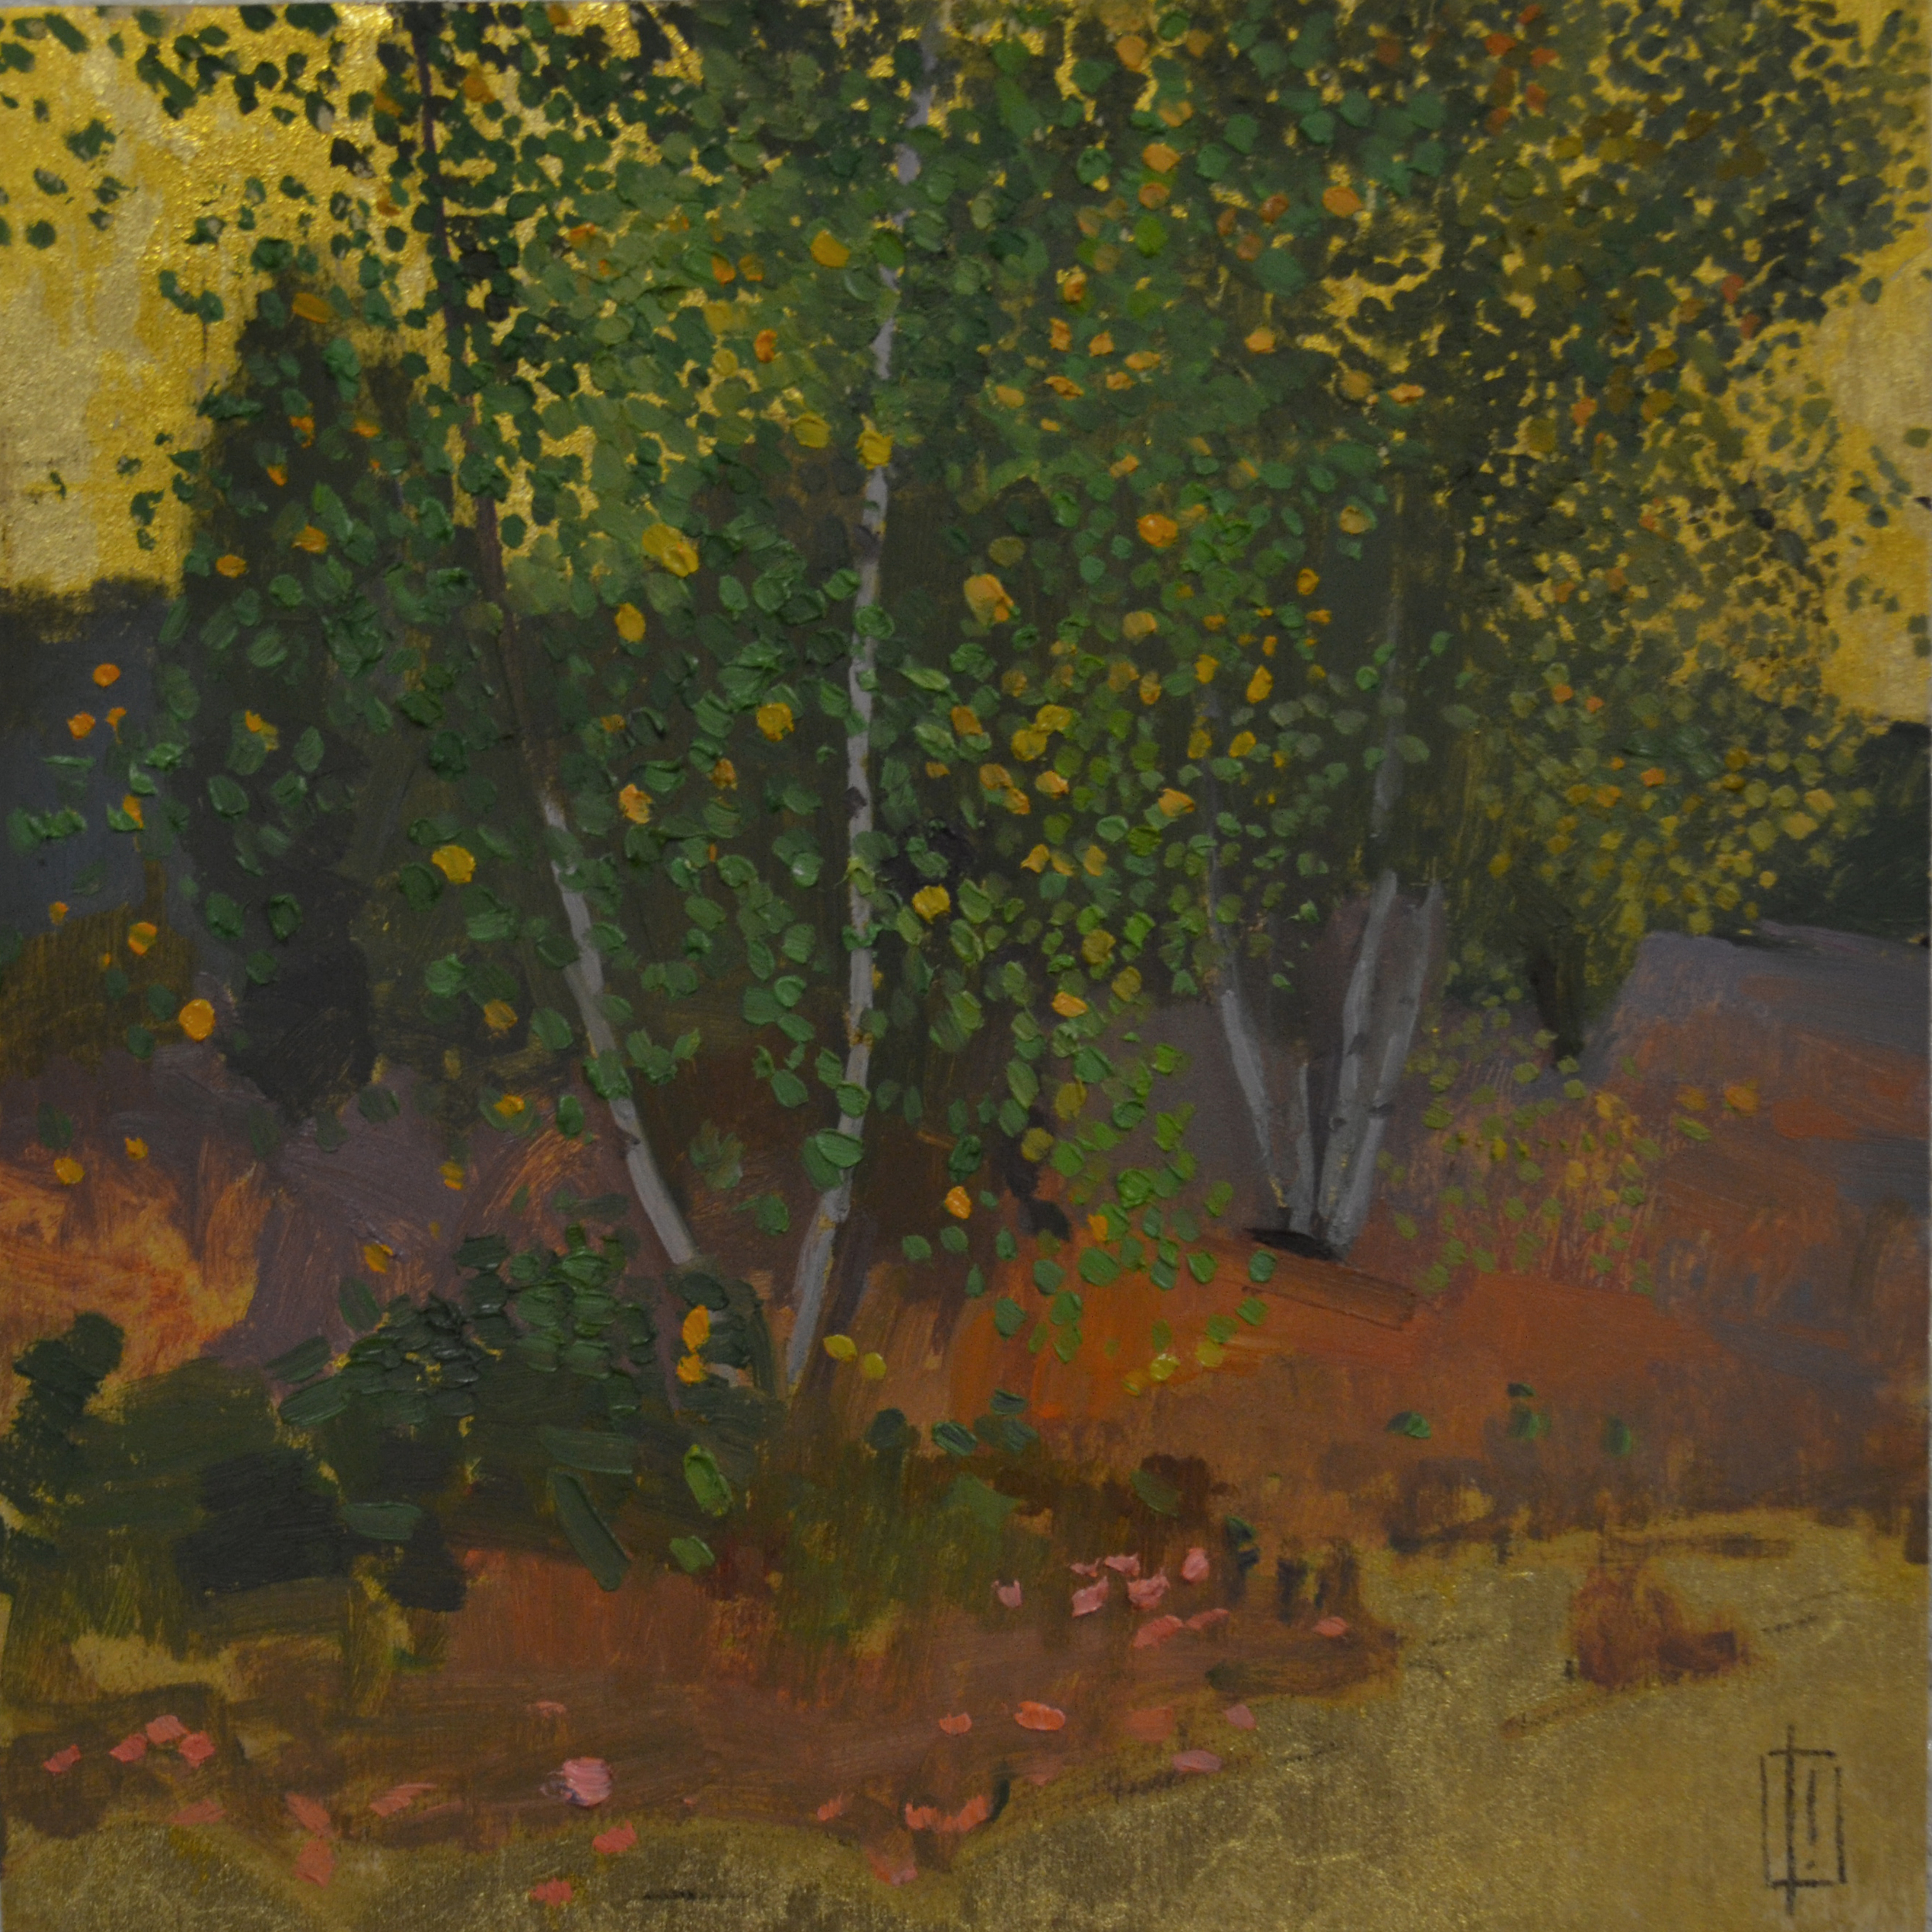   Birches  12 x 12 oil on 23k gilded panel  sold 